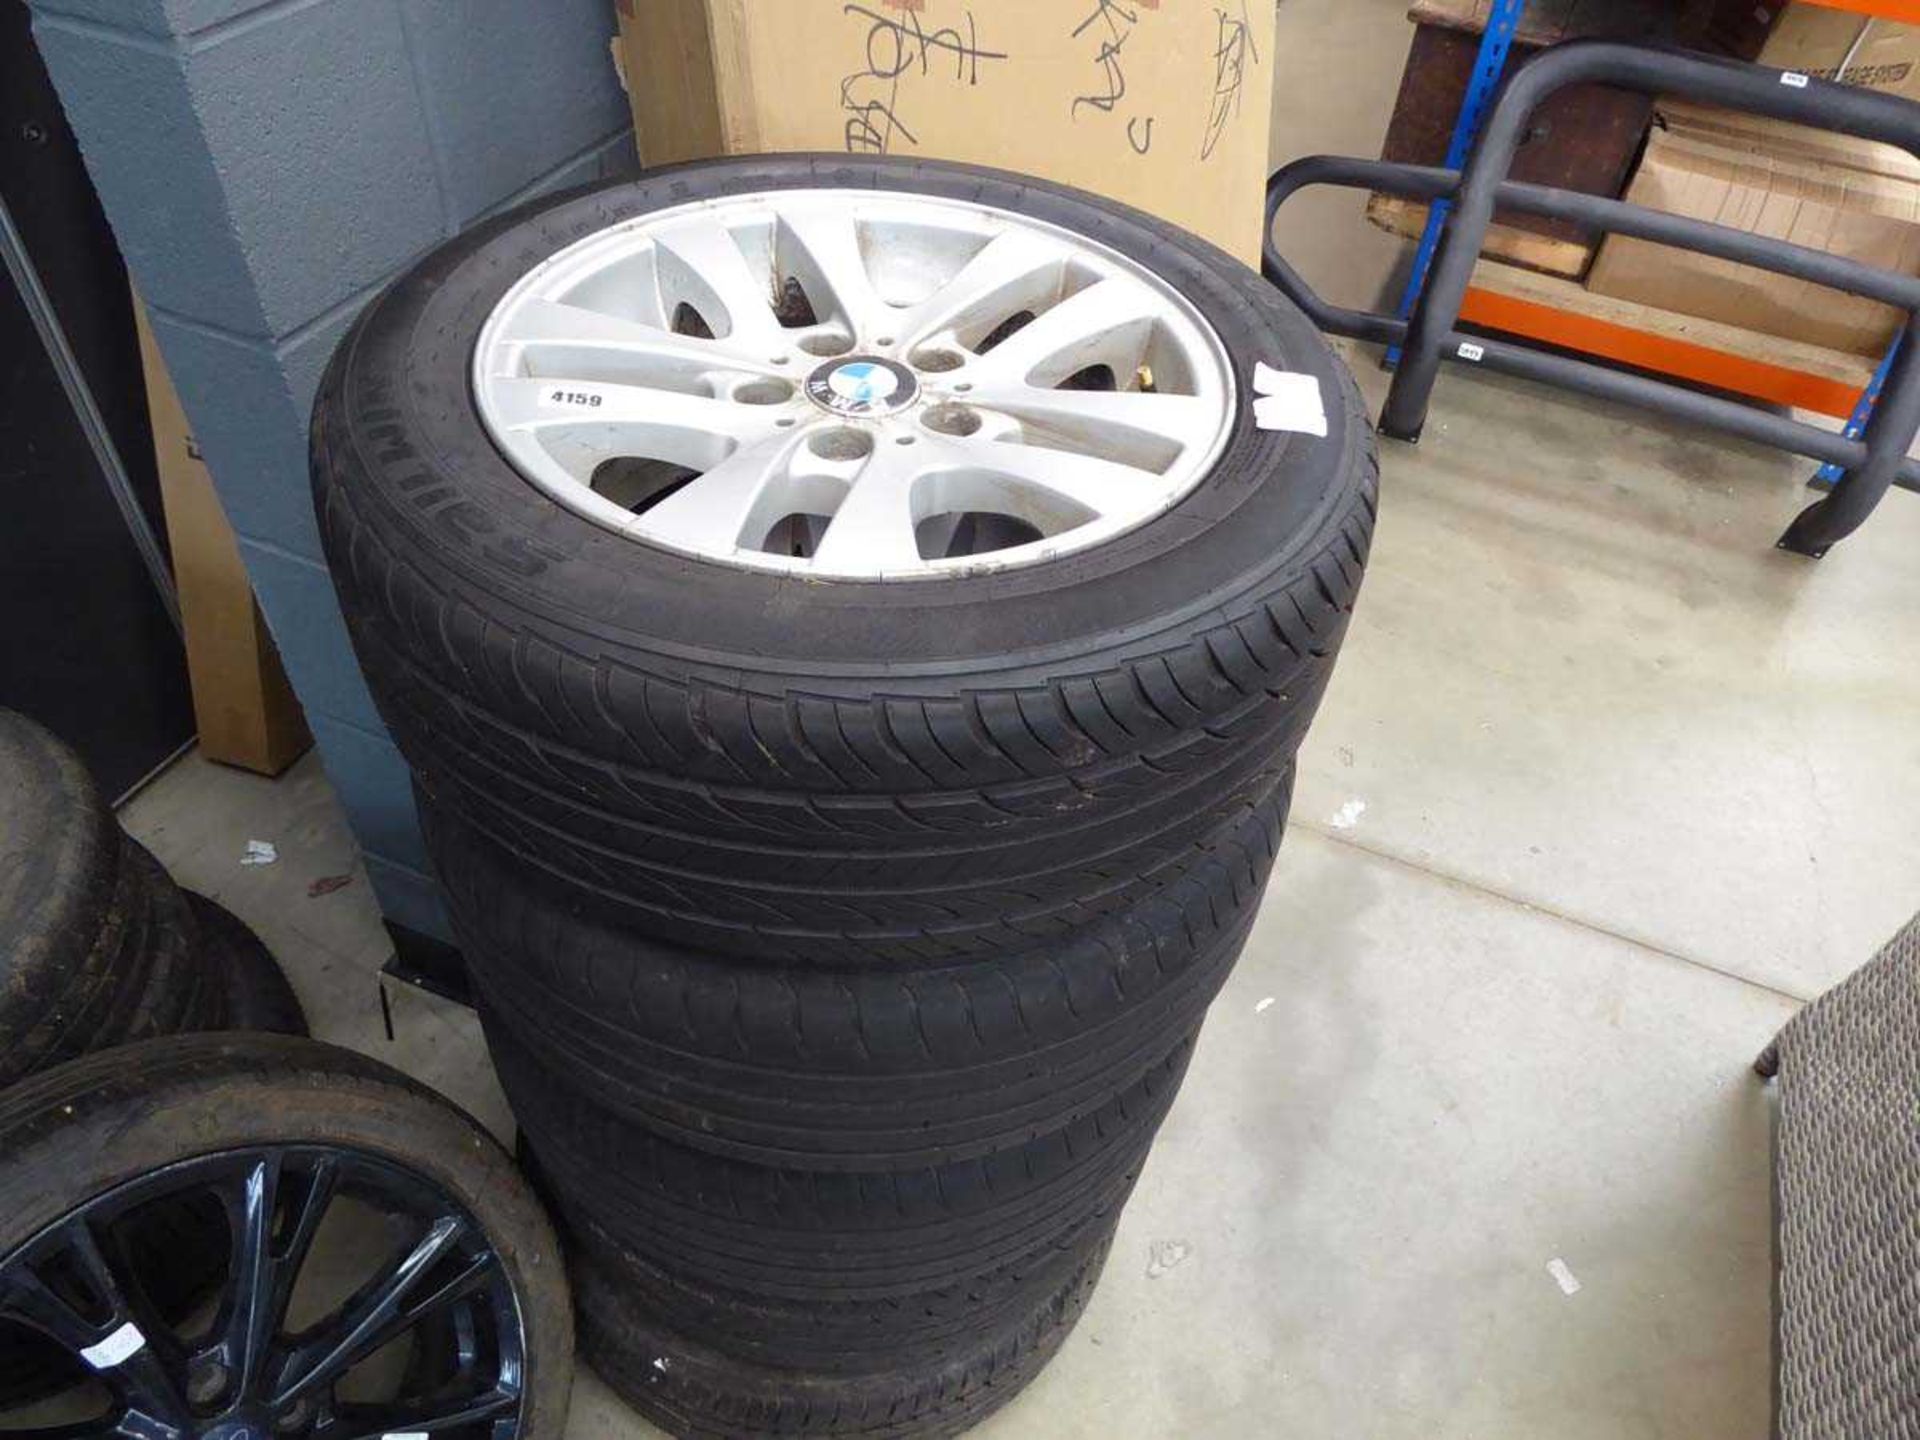 3 BMW alloy wheels and tyres, 1 Toyota alloy wheel and tyre and a tyre, no wheel